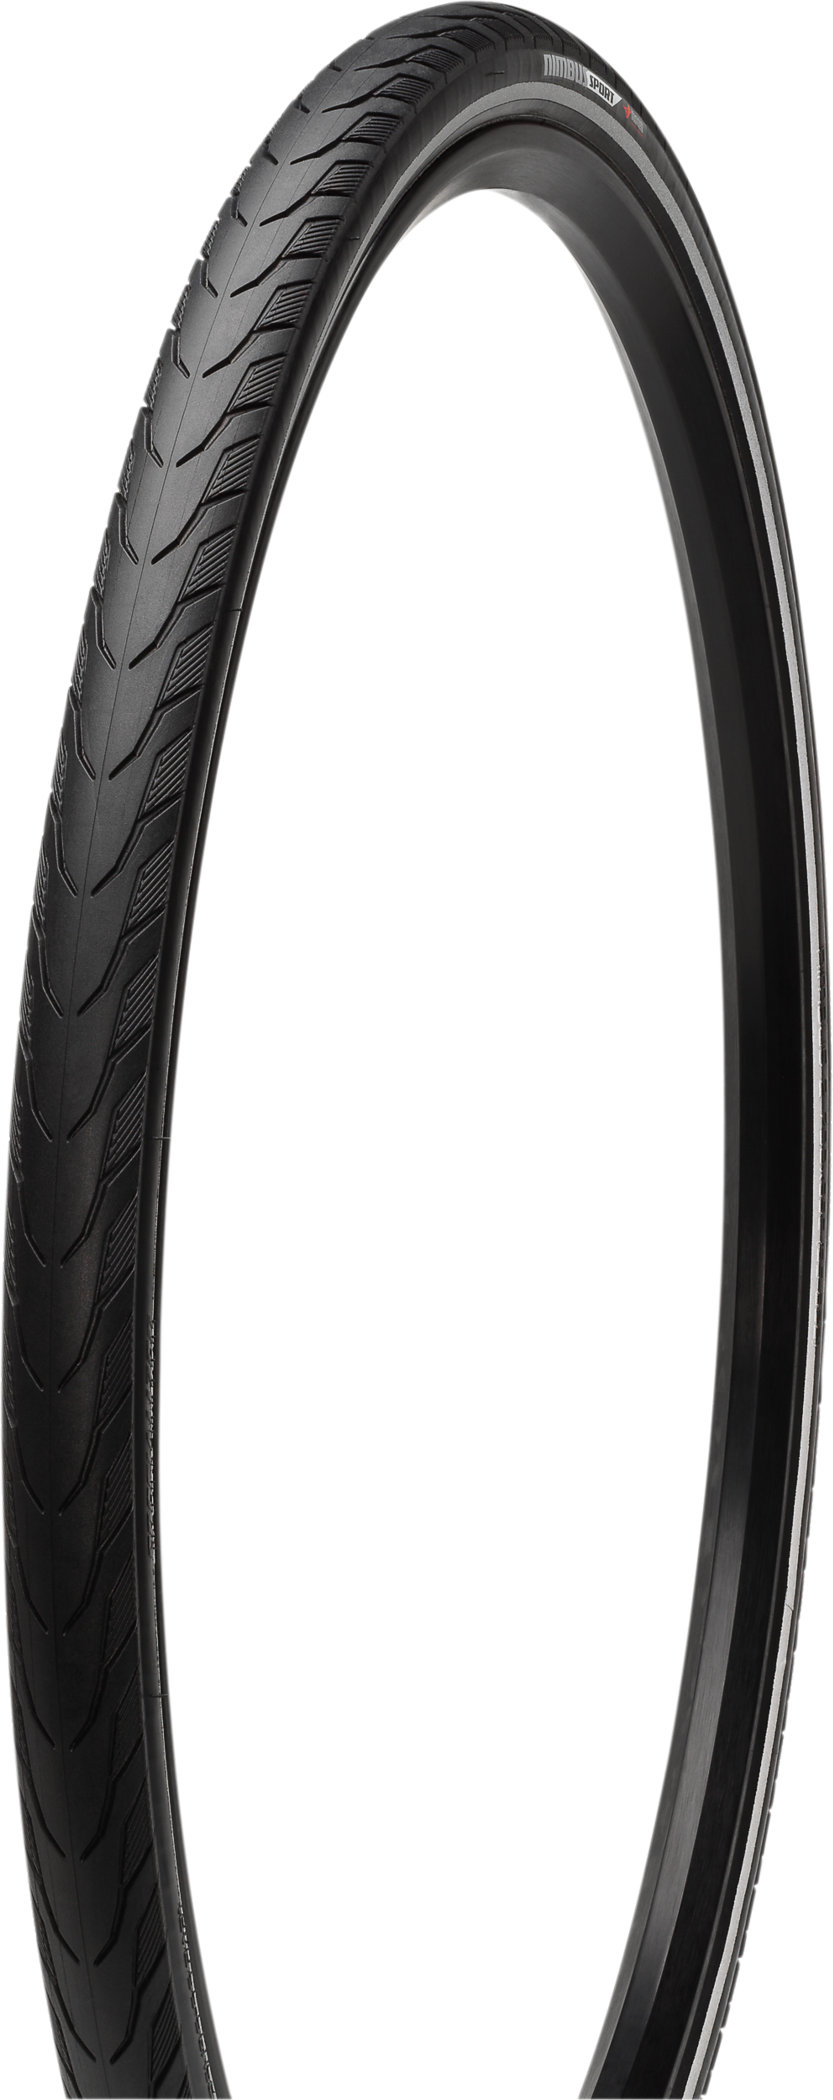 specialized armadillo tires